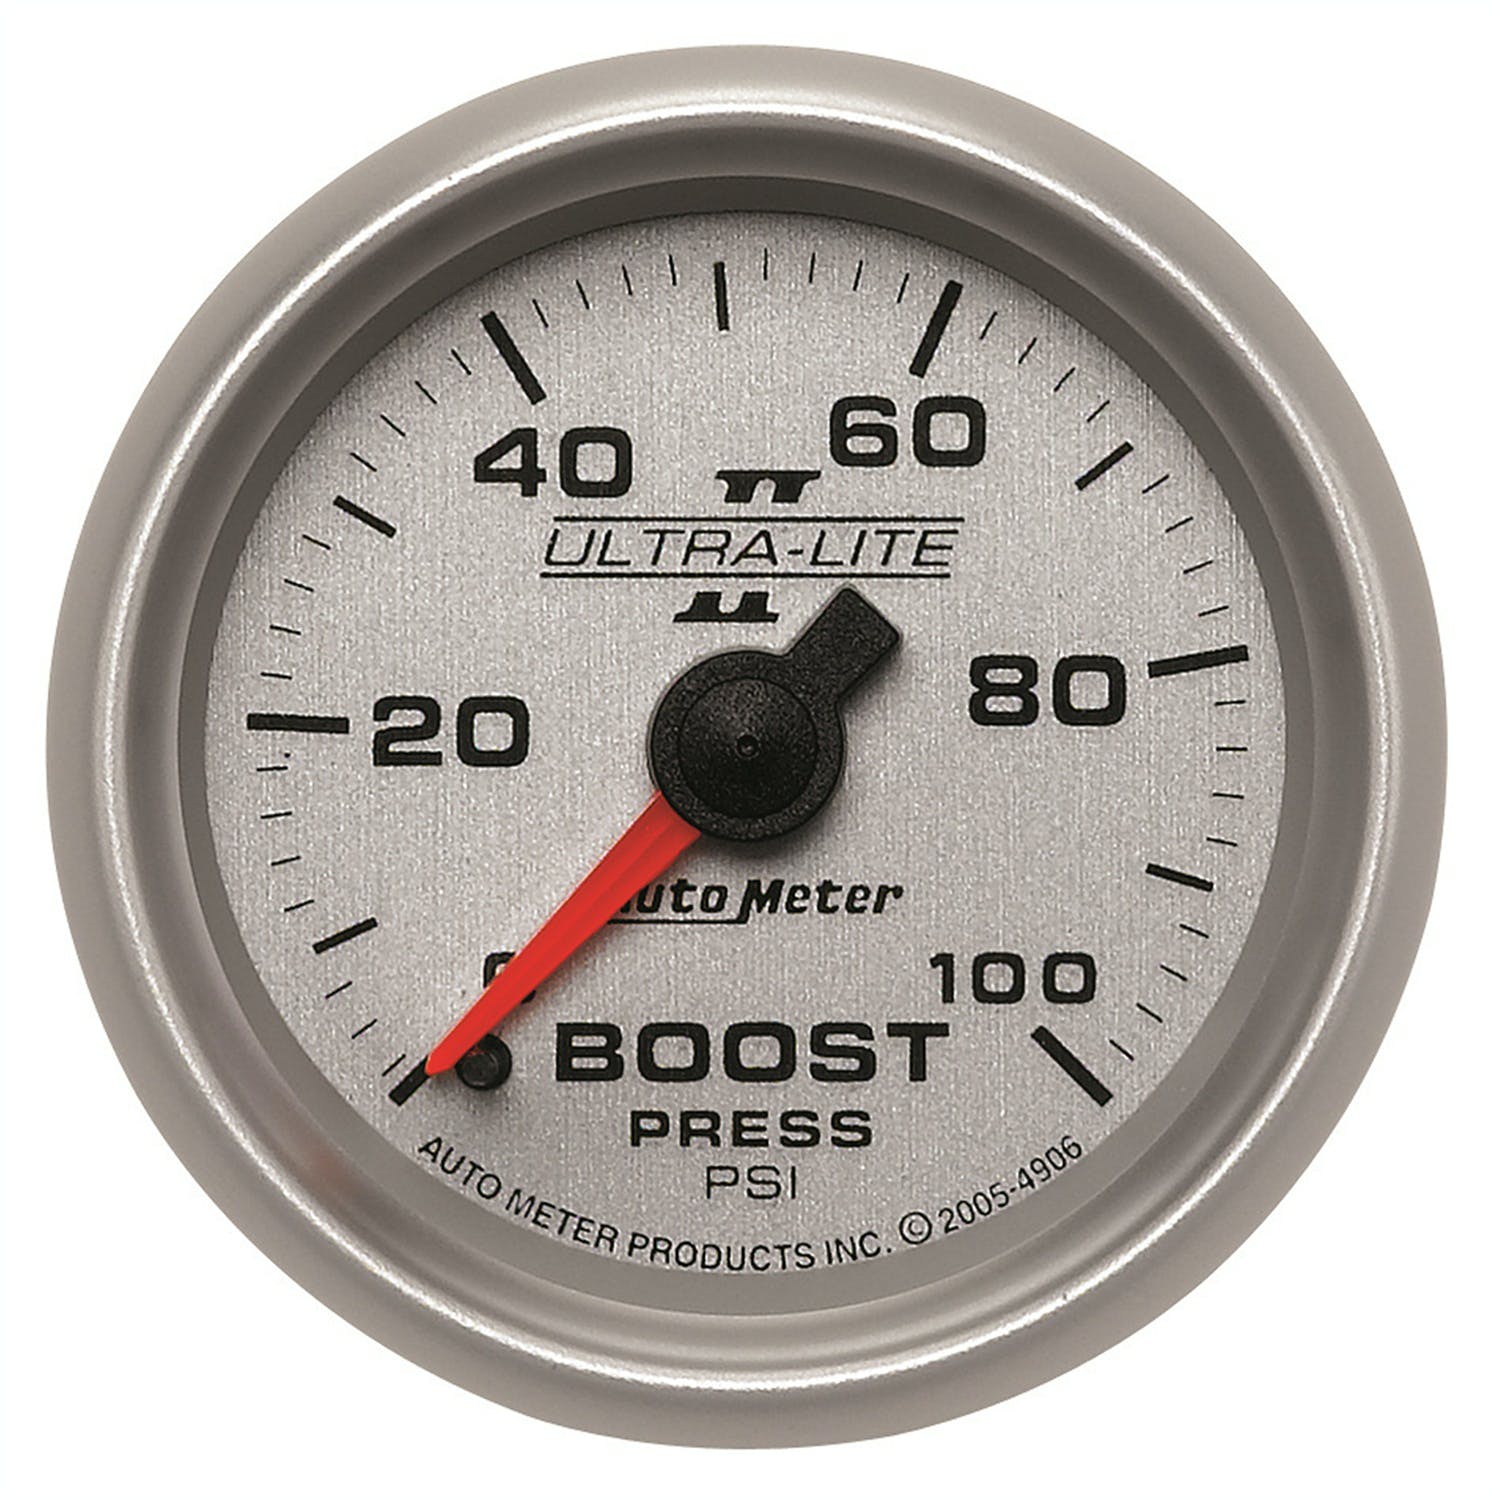 AutoMeter Products 4906 Boost 0-100 PSI